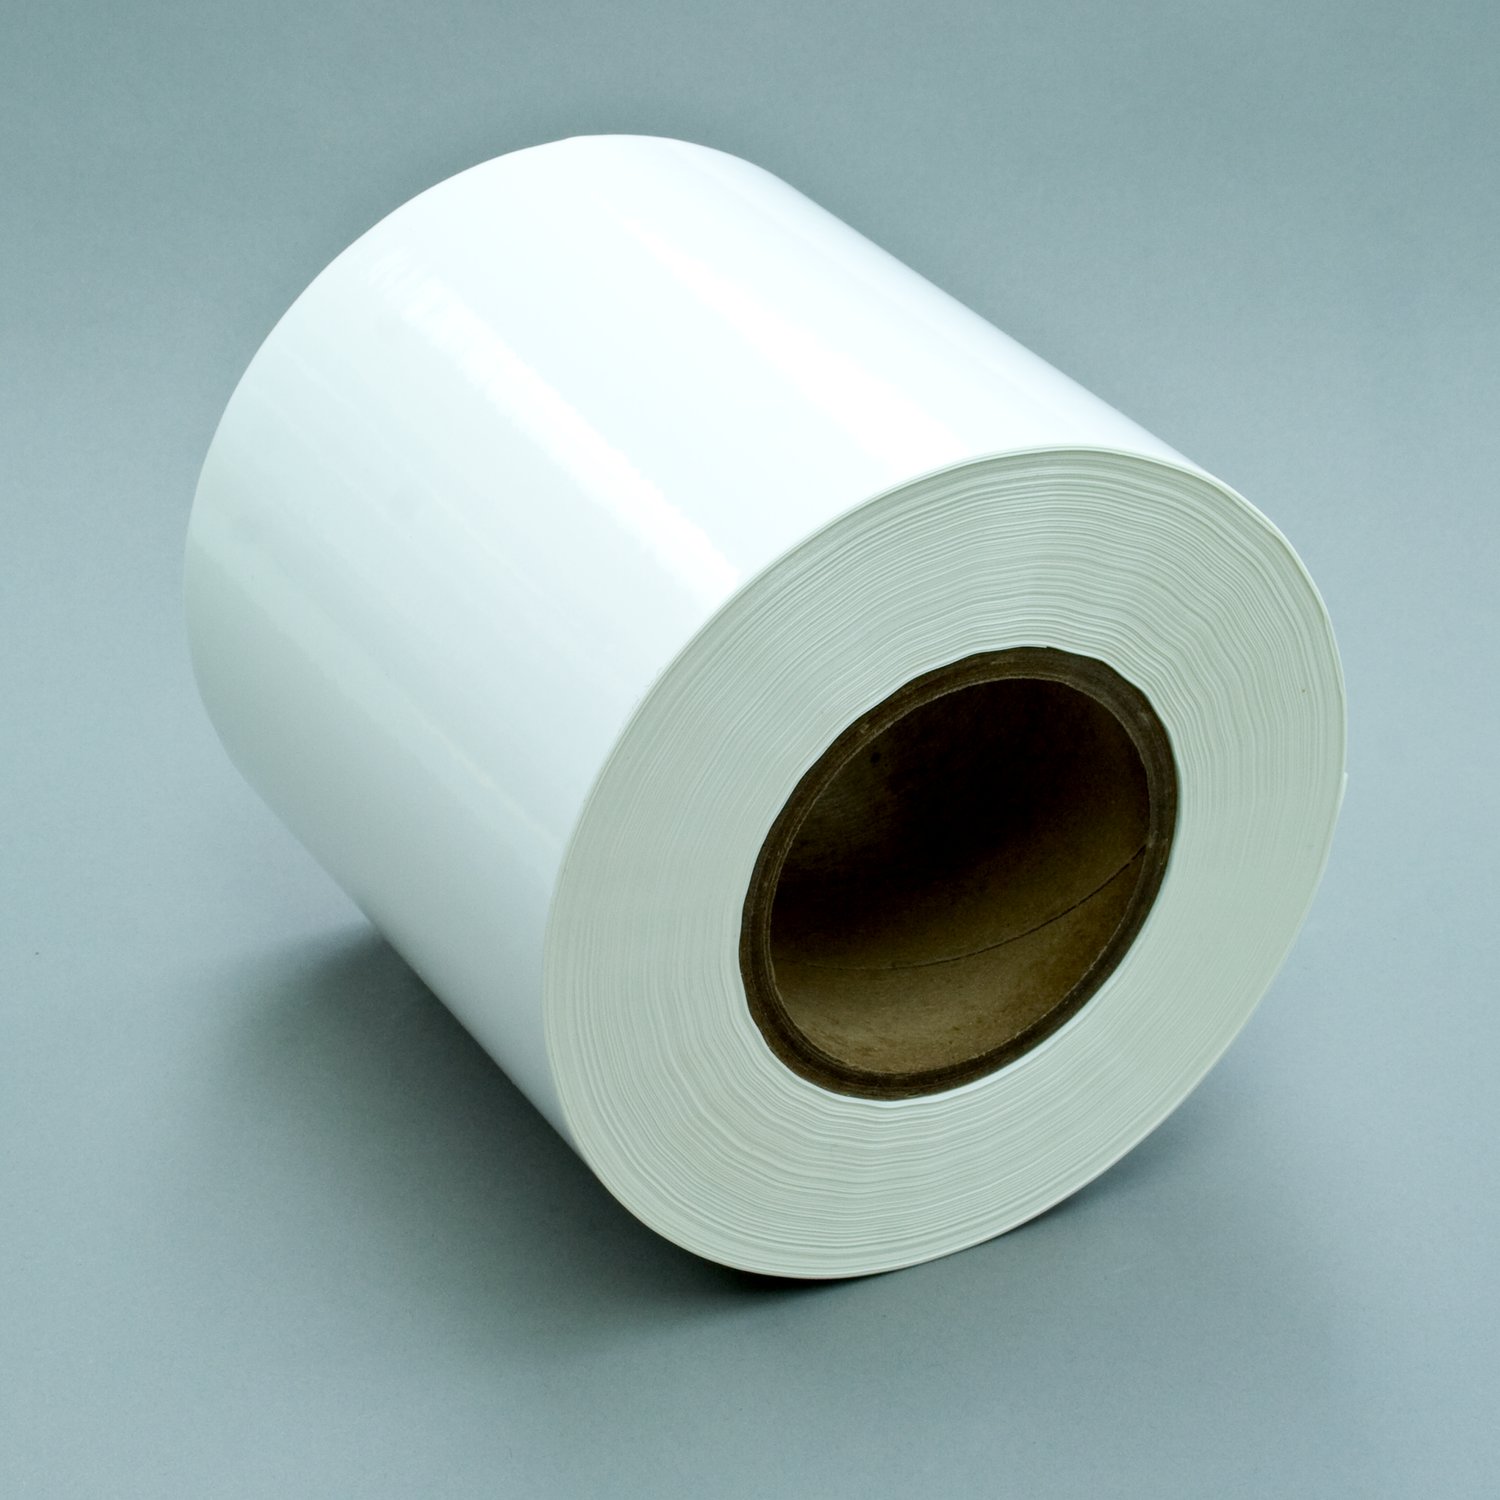 7100009228 - 3M Thermal Transfer Label Material 7816, White Polyester Gloss, 6 in x
1668 ft, 1 Roll/Case